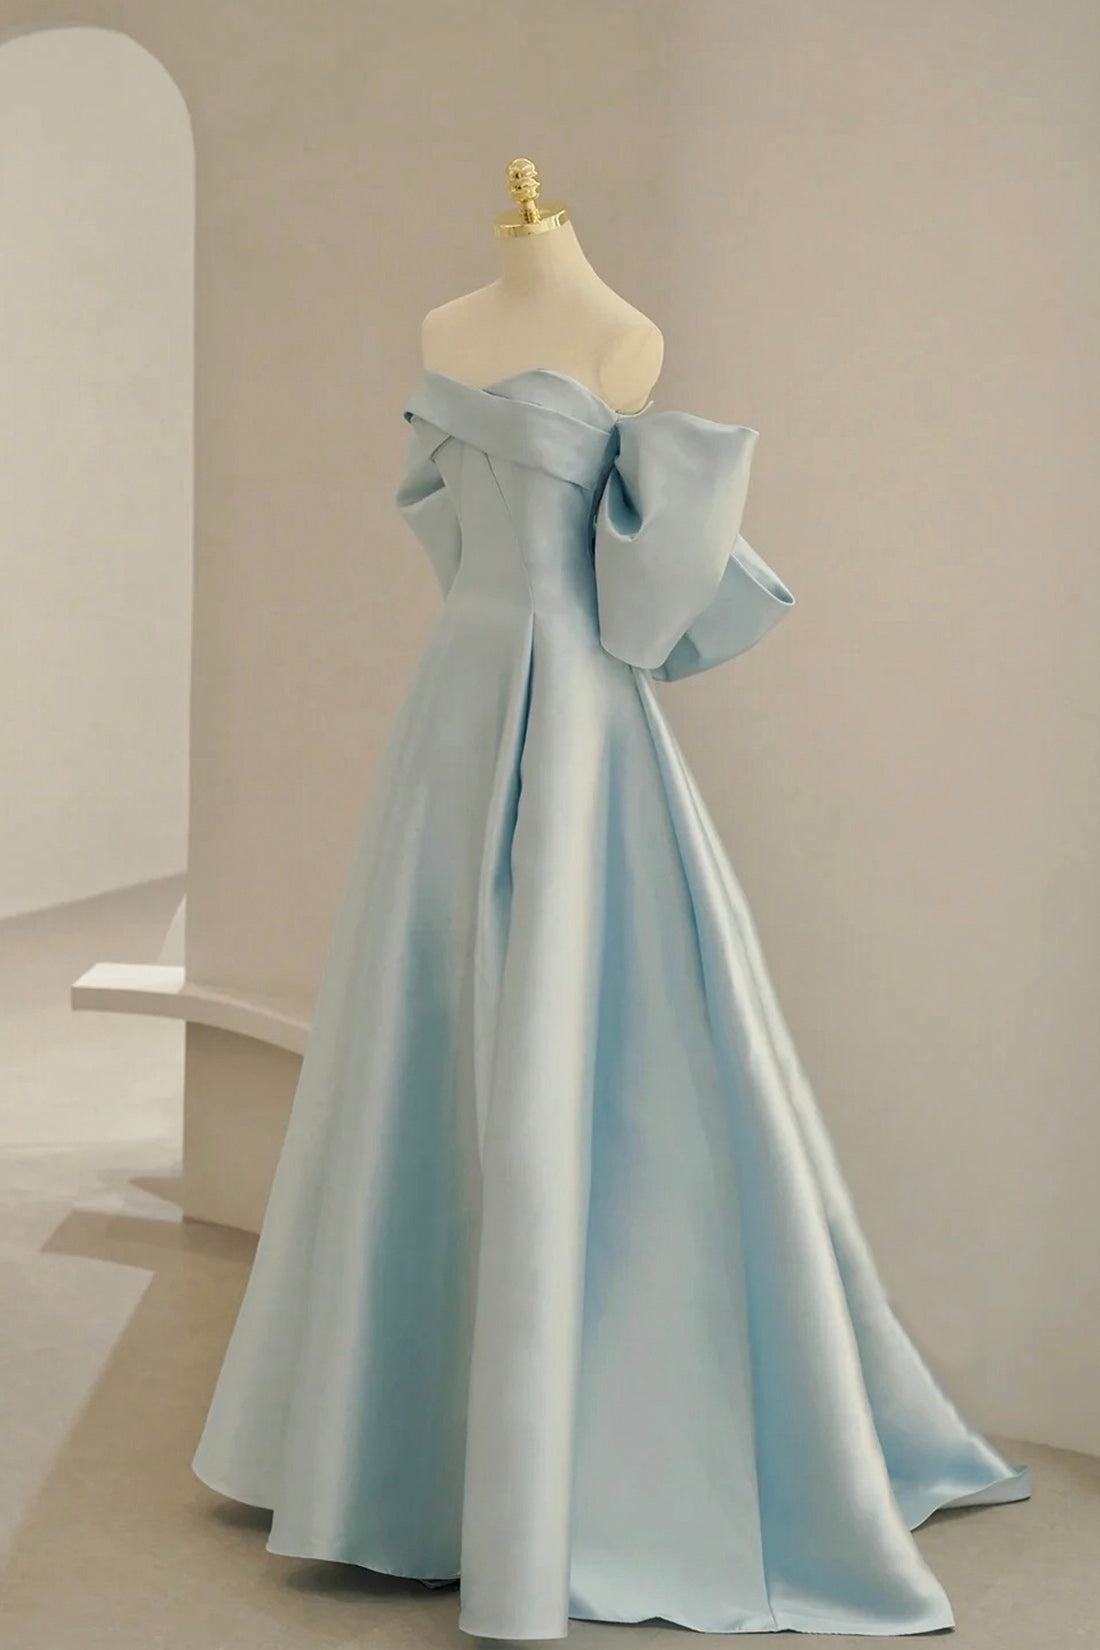 Prom Dresses2021, Blue Satin Long Prom Dress with Big Bow, Blue A-Line Evening Party Dress